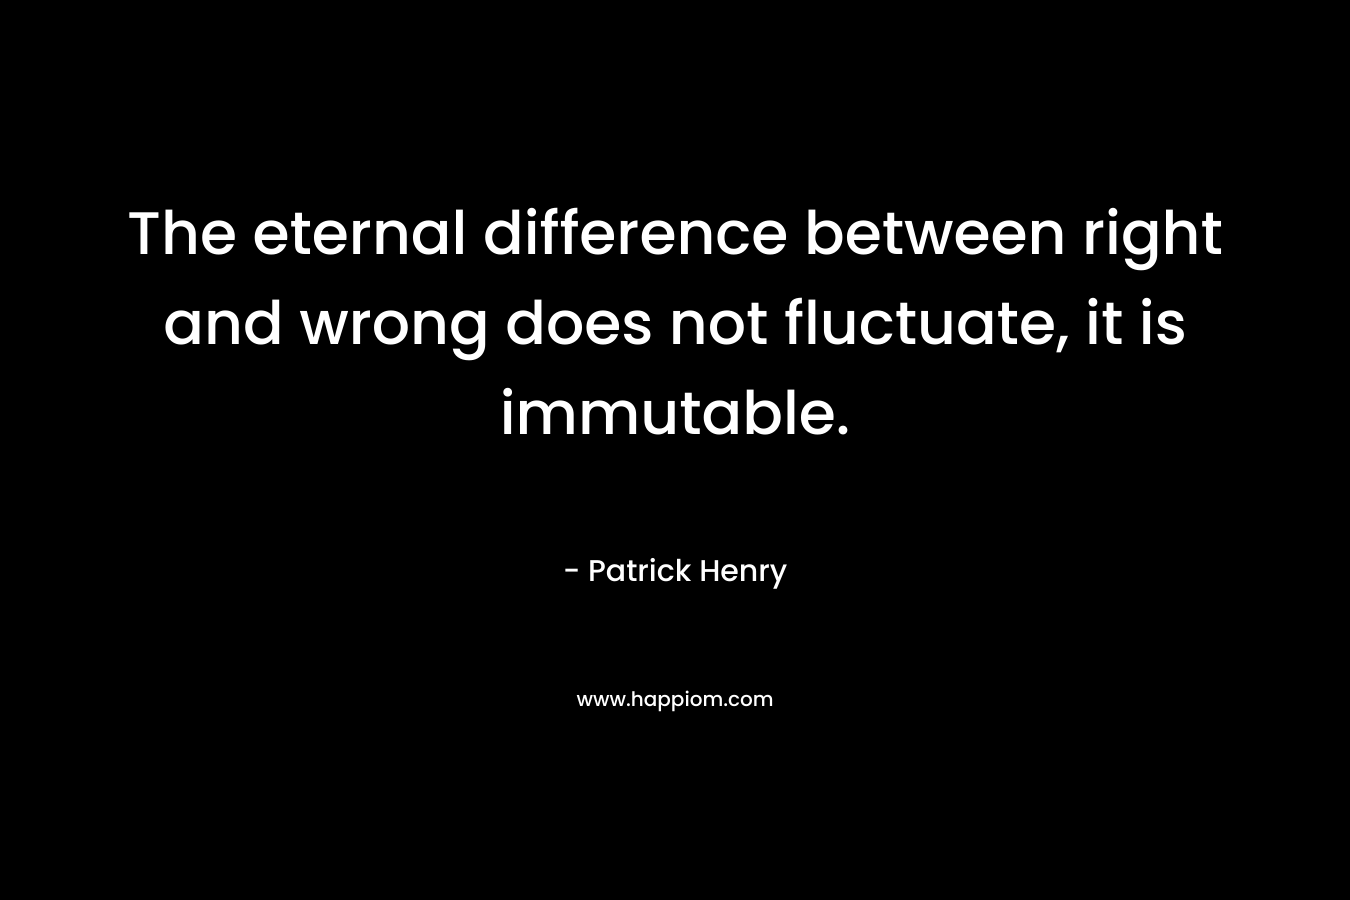 The eternal difference between right and wrong does not fluctuate, it is immutable. – Patrick Henry